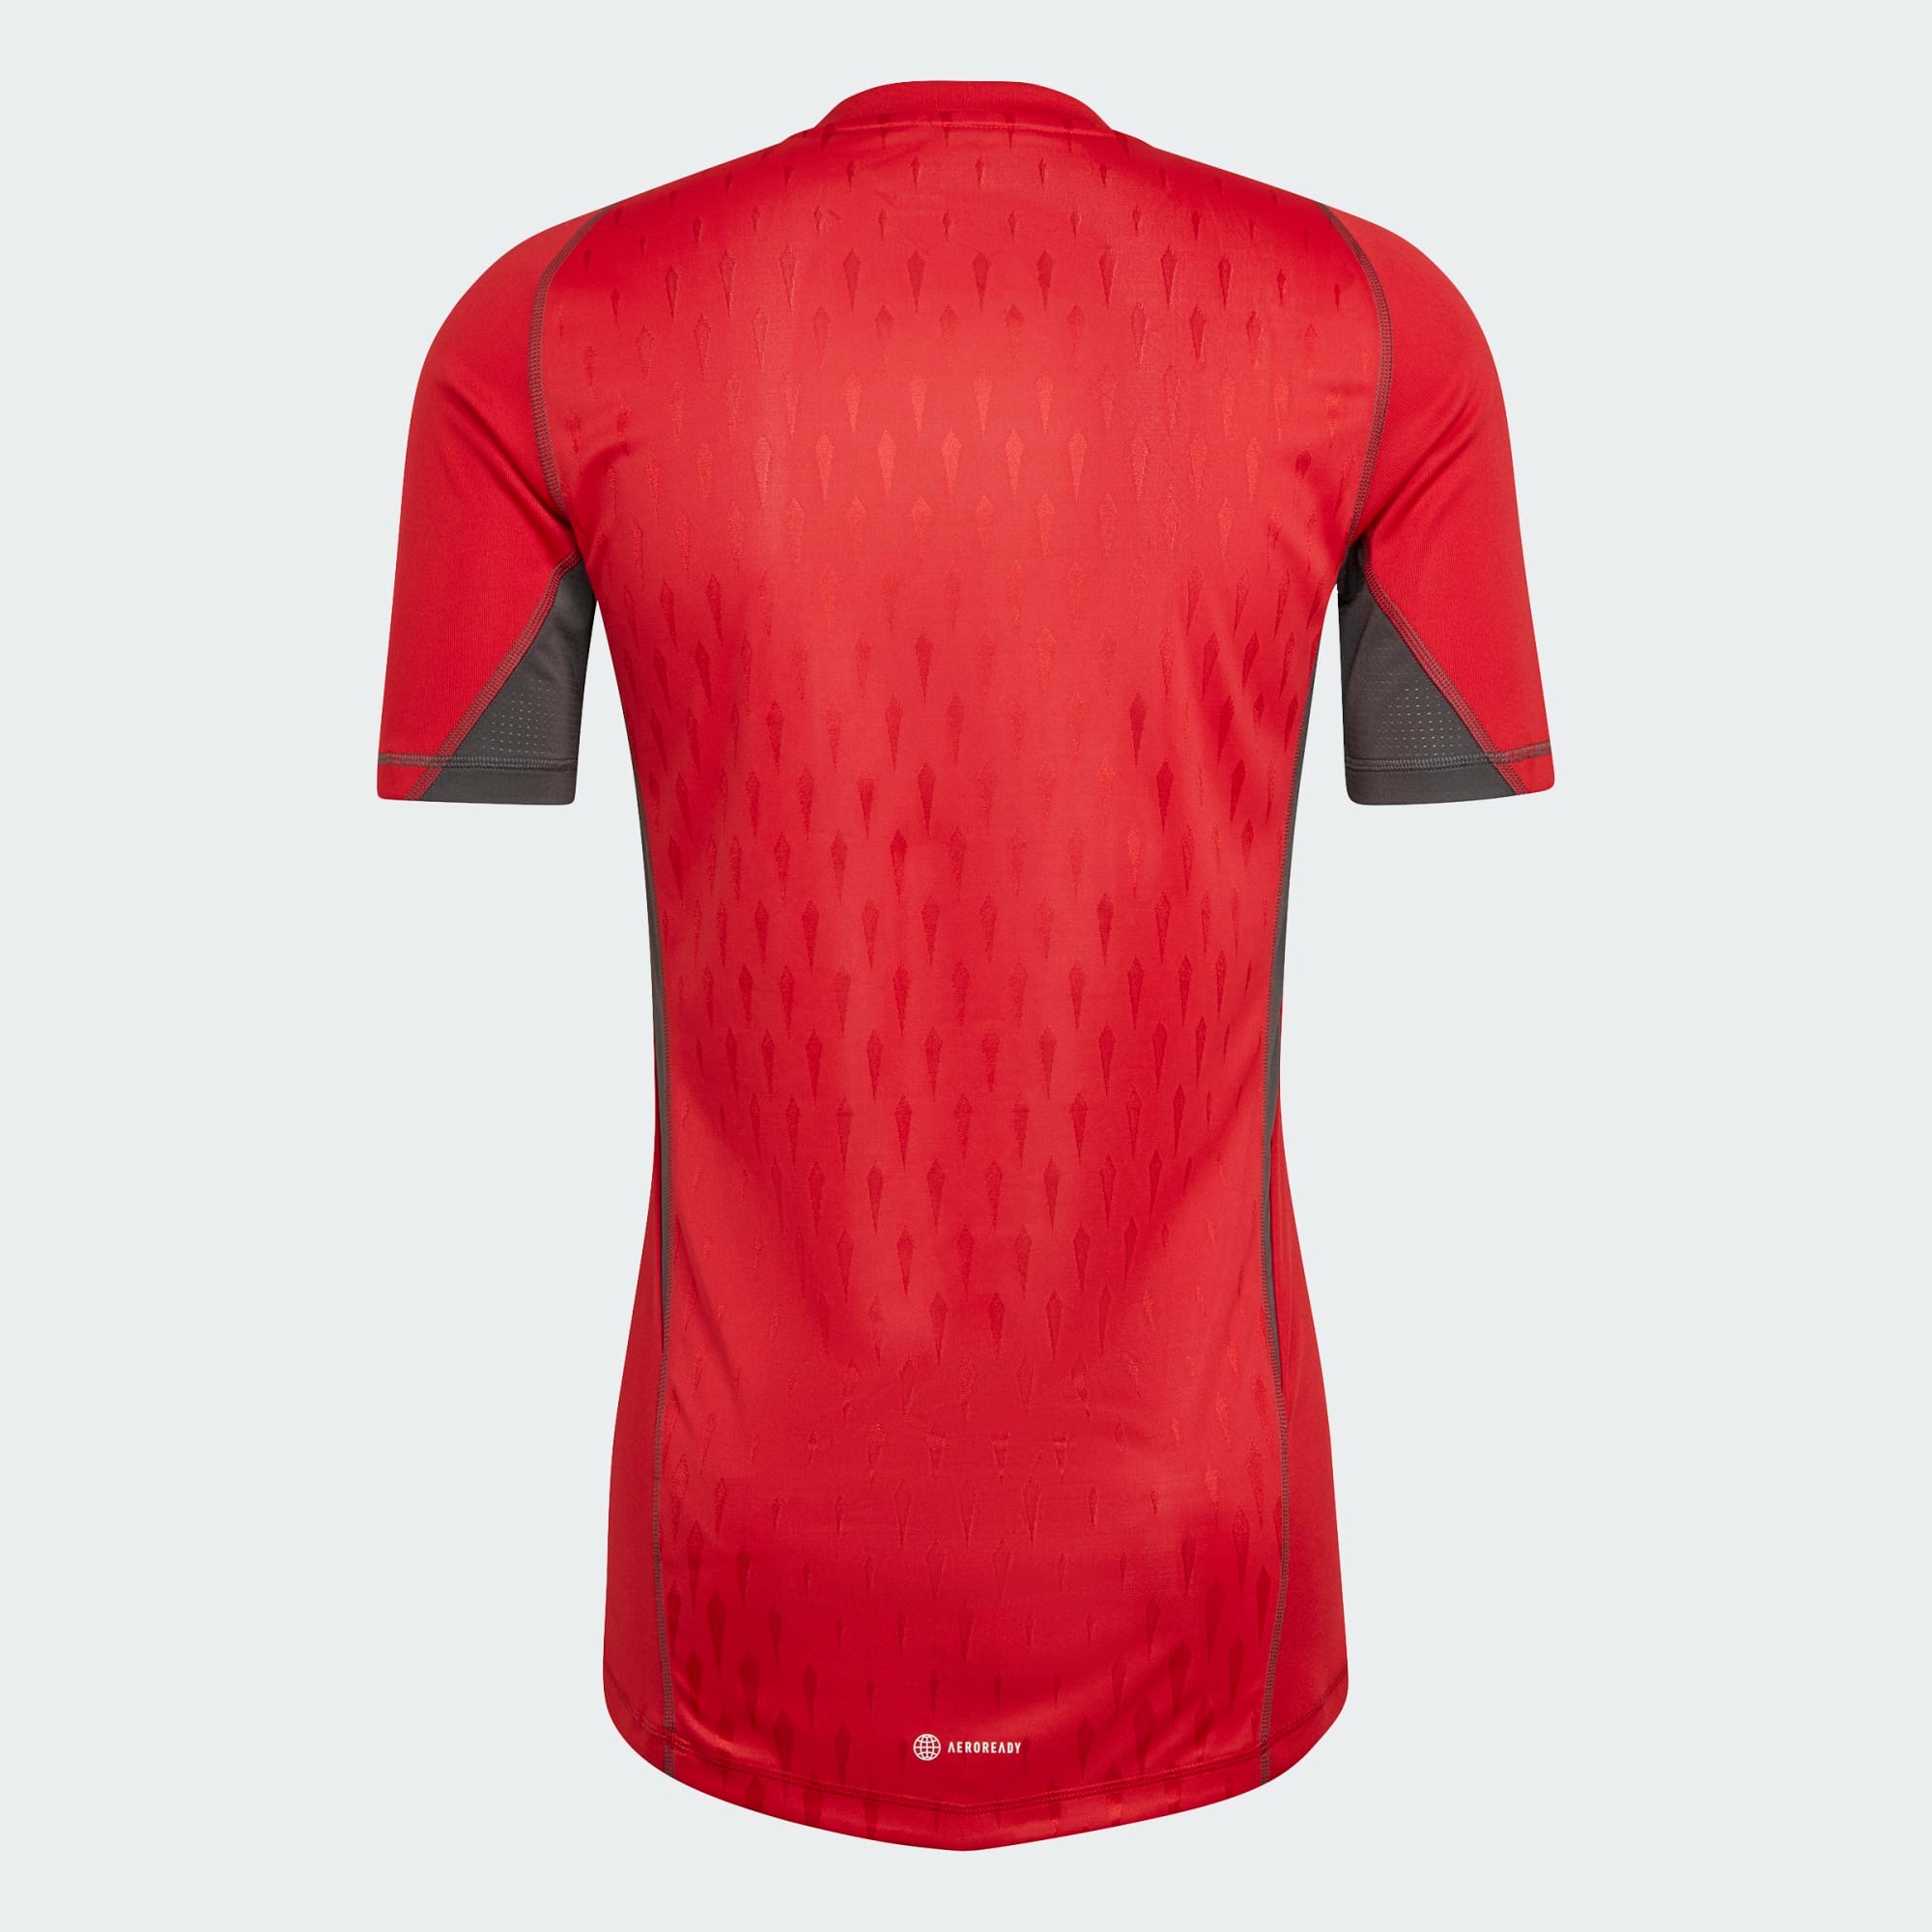 ADIDAS T23 PROMO GK JERSEY SHORT SLEEVE TEAM CORE RED